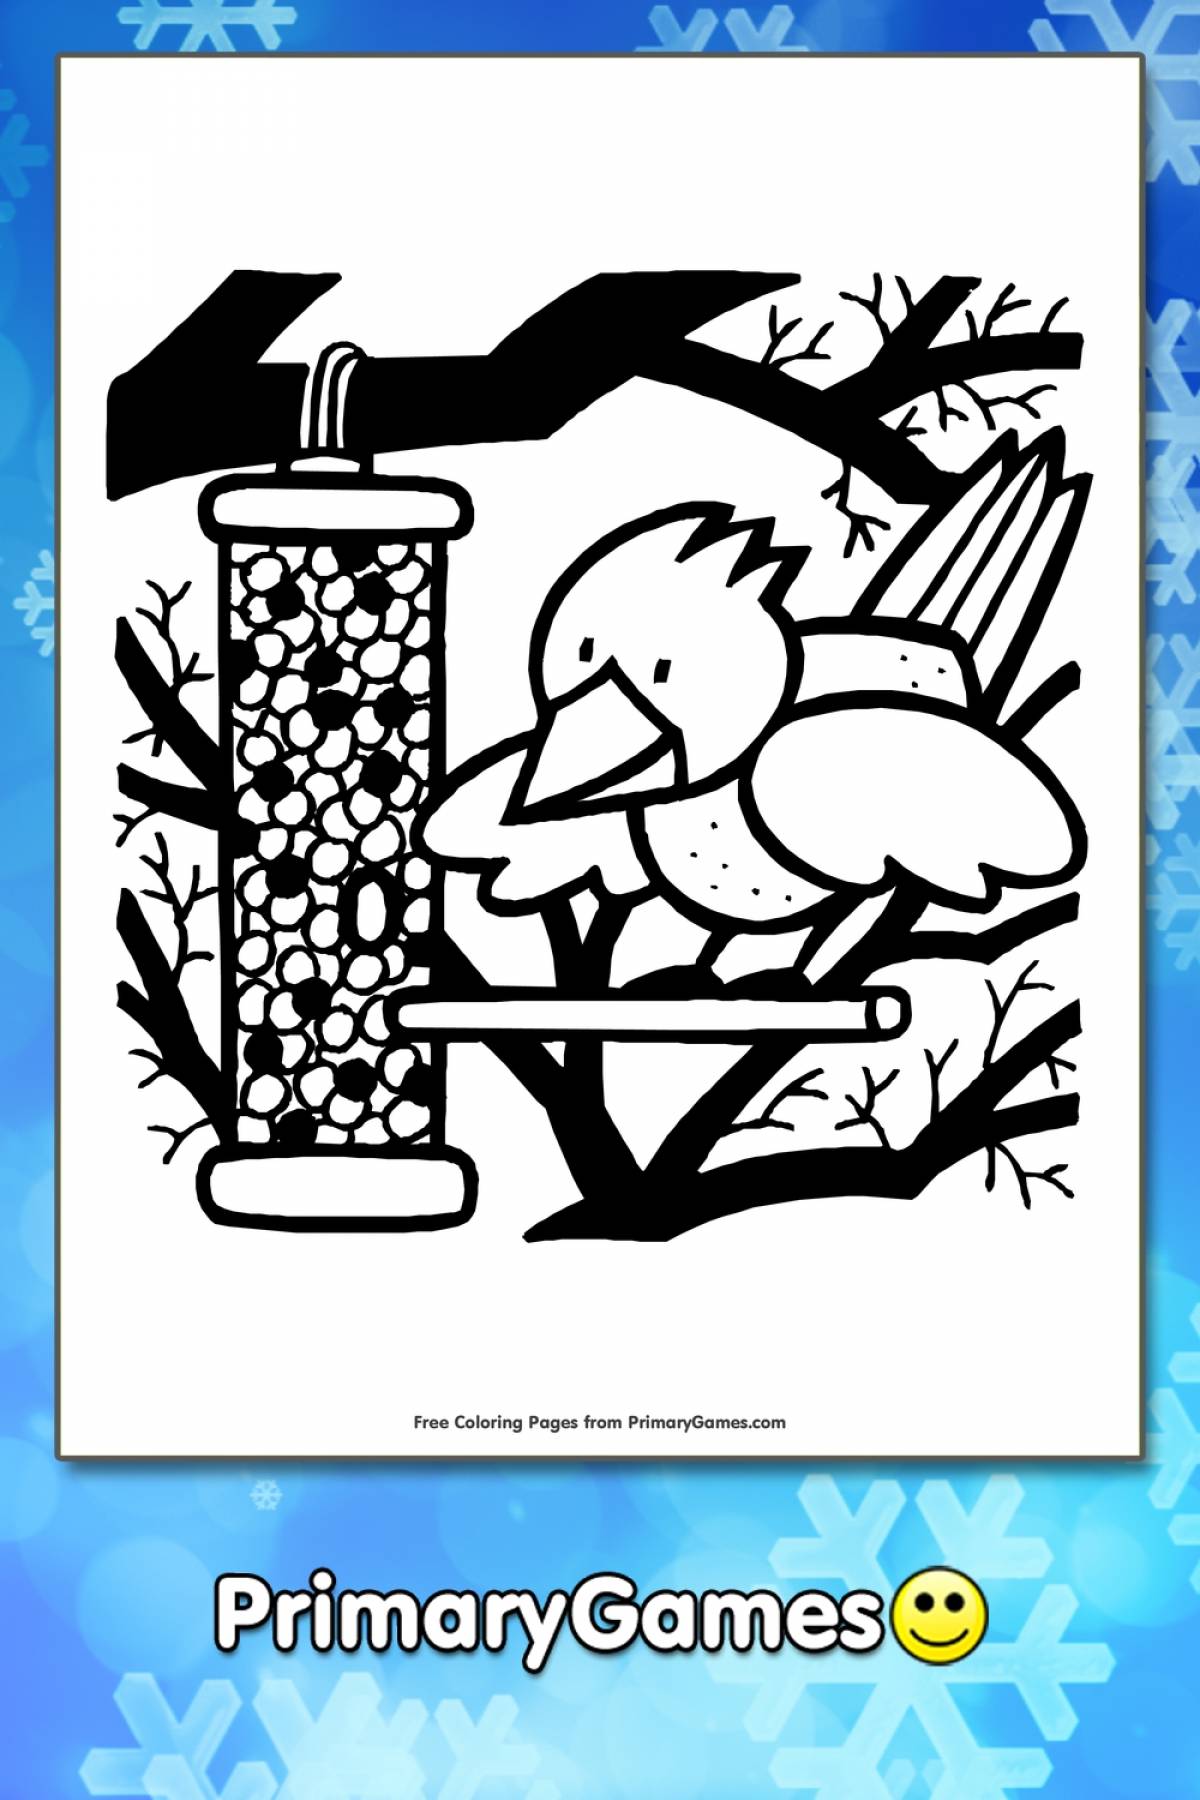 Fun feeder coloring page for the little ones